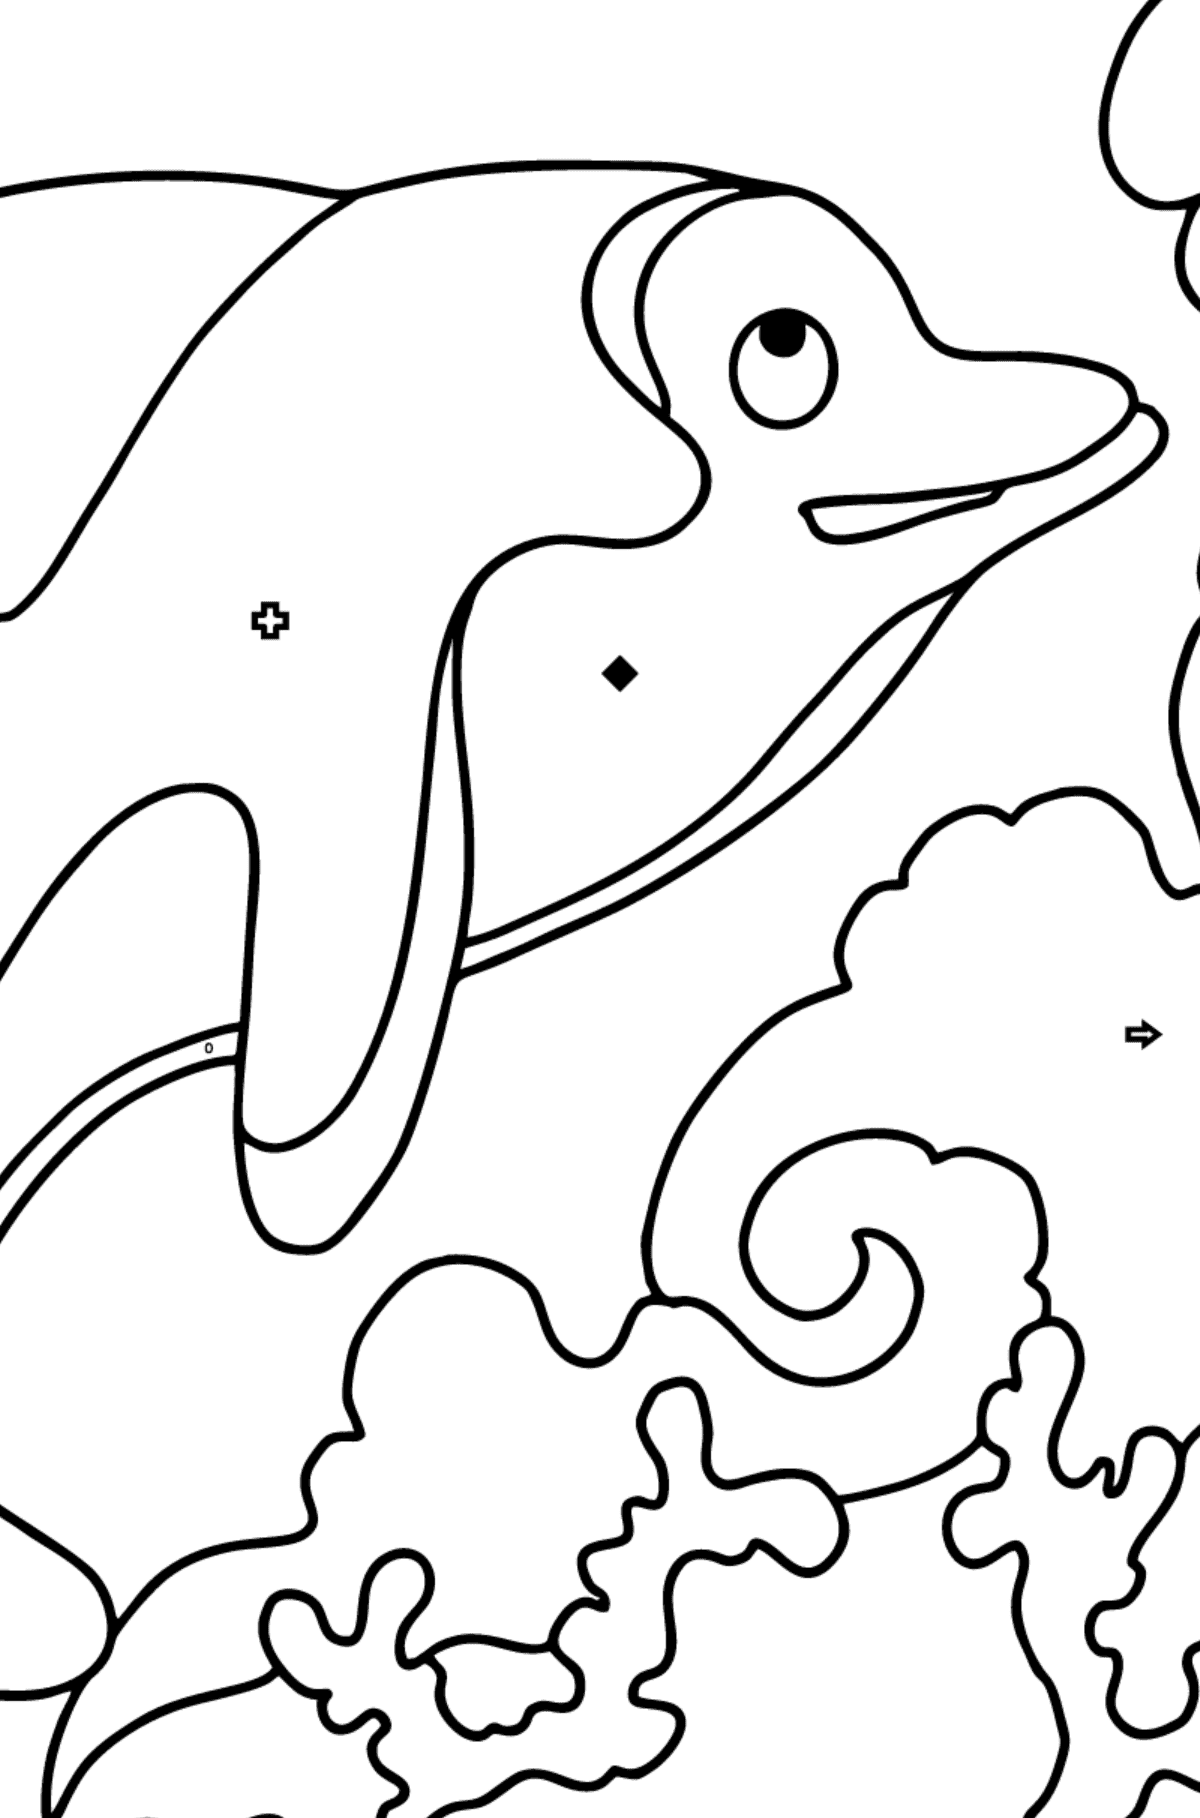 Coloring Page - A Dolphin, a Smart and Friendly Animal - Coloring by Symbols and Geometric Shapes for Children